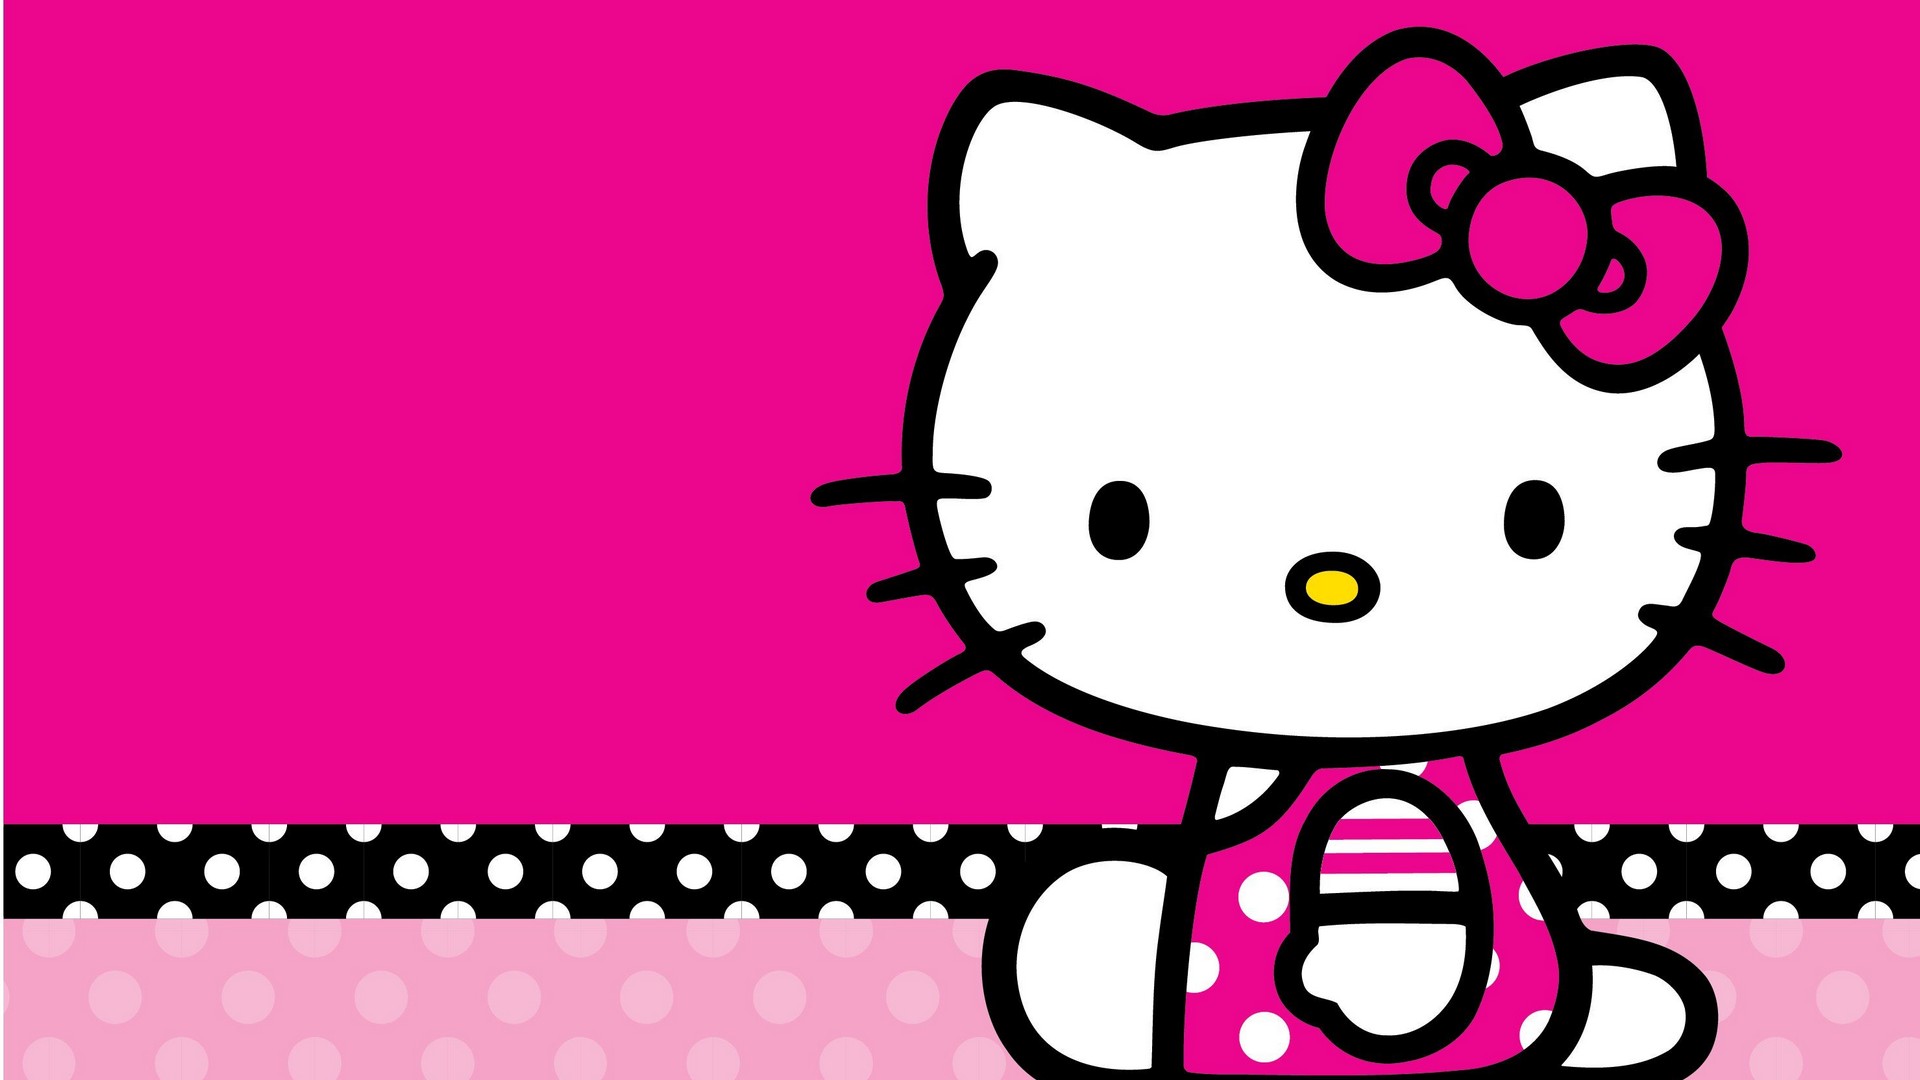 Best Hello Kitty Pictures Wallpaper with resolution 1920X1080 pixel. You can use this wallpaper as background for your desktop Computer Screensavers, Android or iPhone smartphones